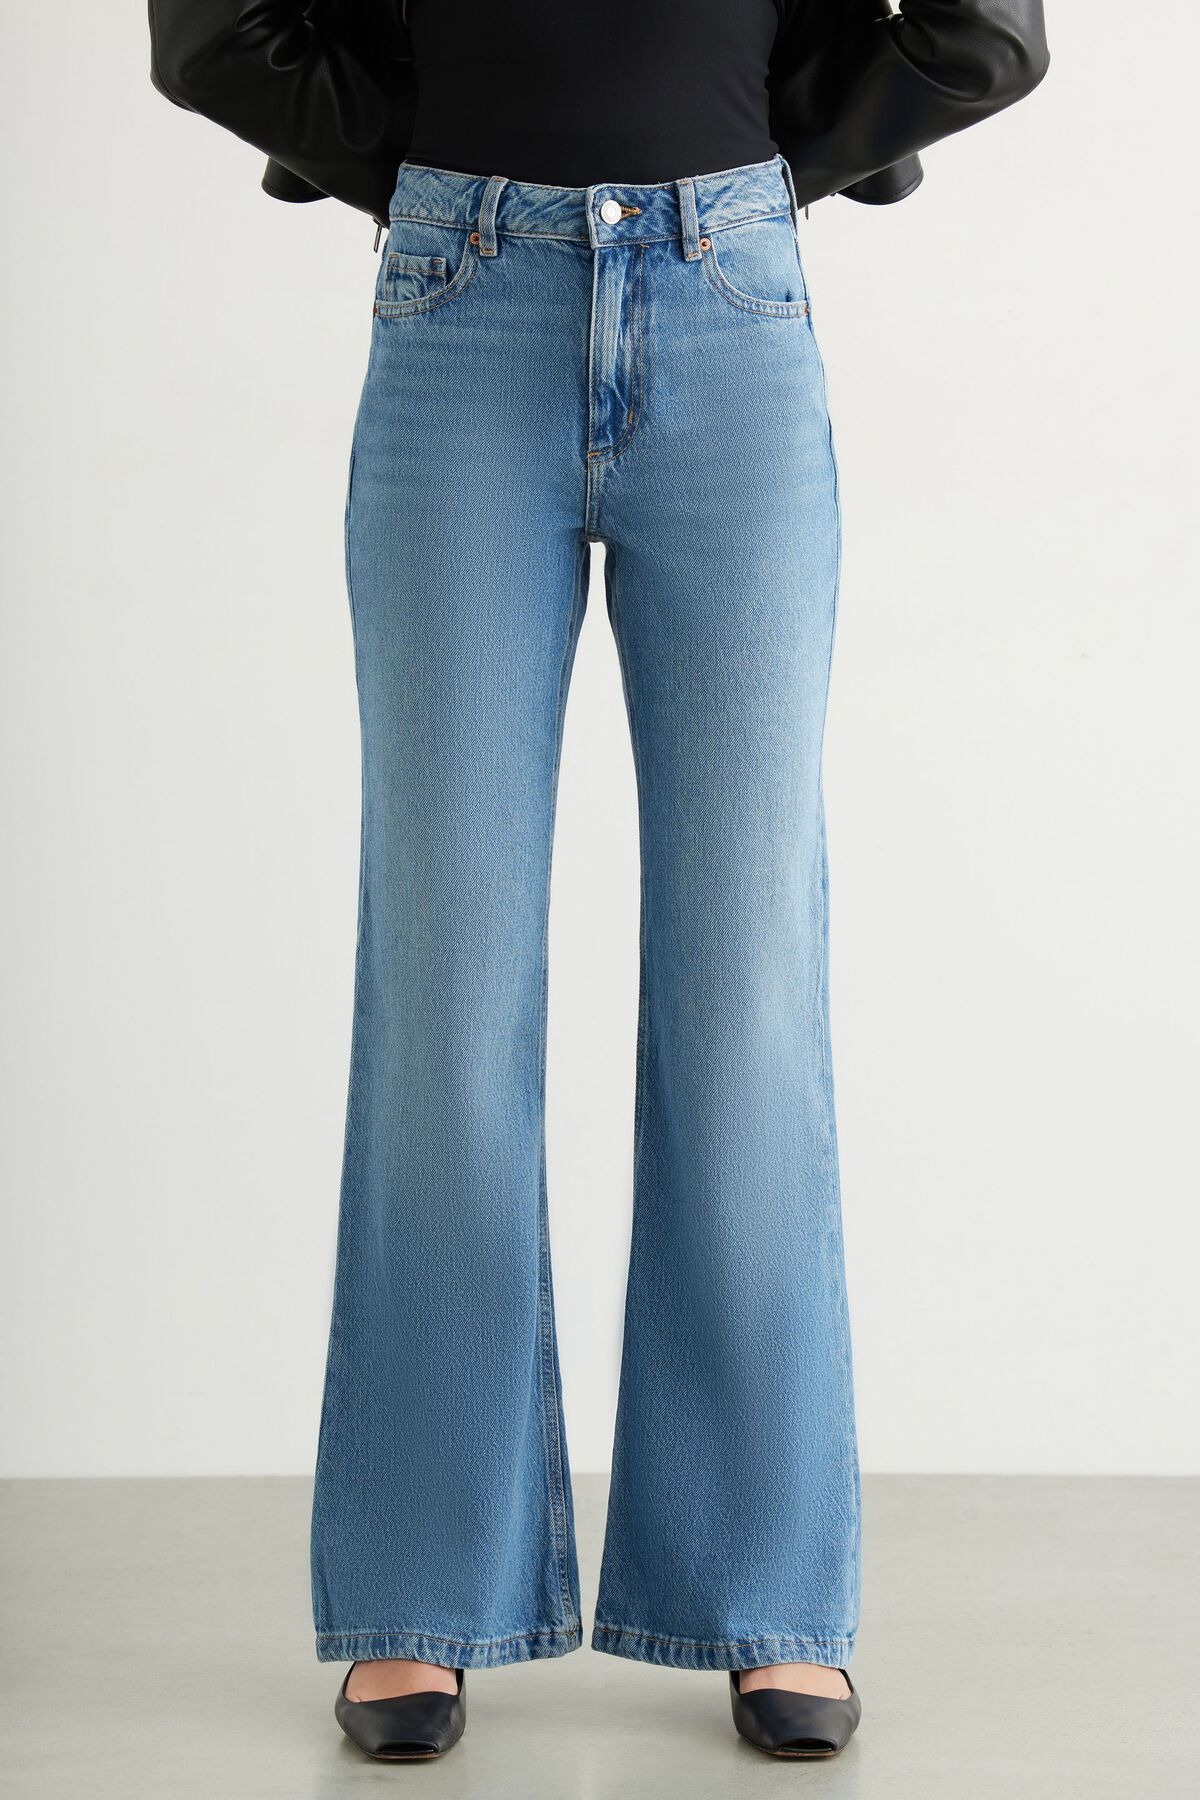 Dynamite Hailey Flared Jeans. 2